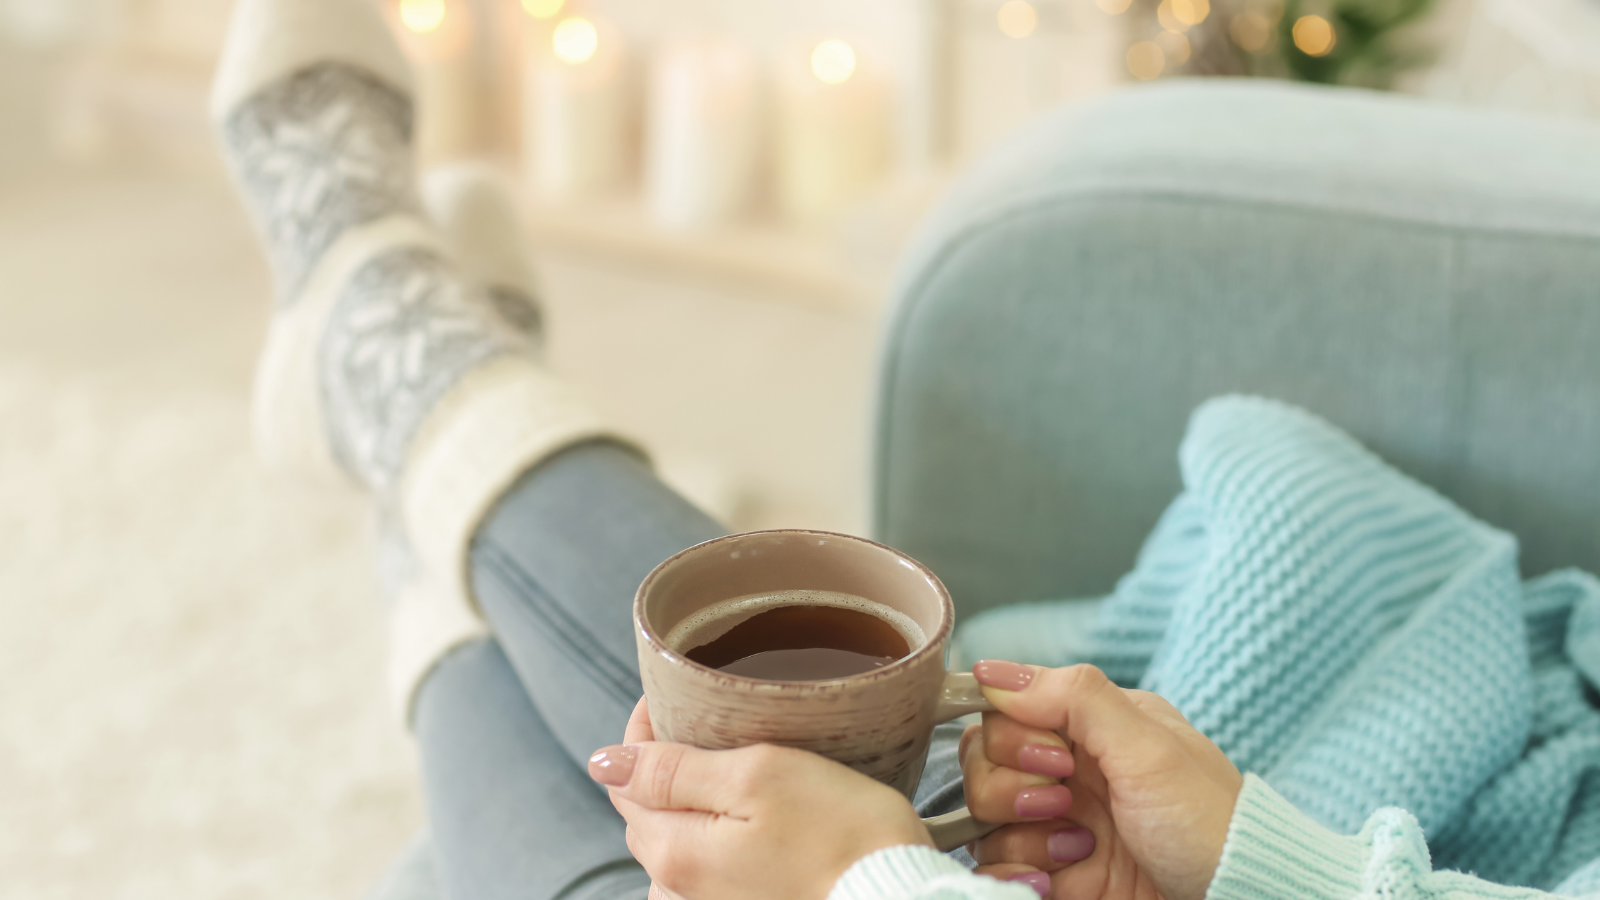 Homeowners can take steps to stay warm while keeping their energy costs down. 